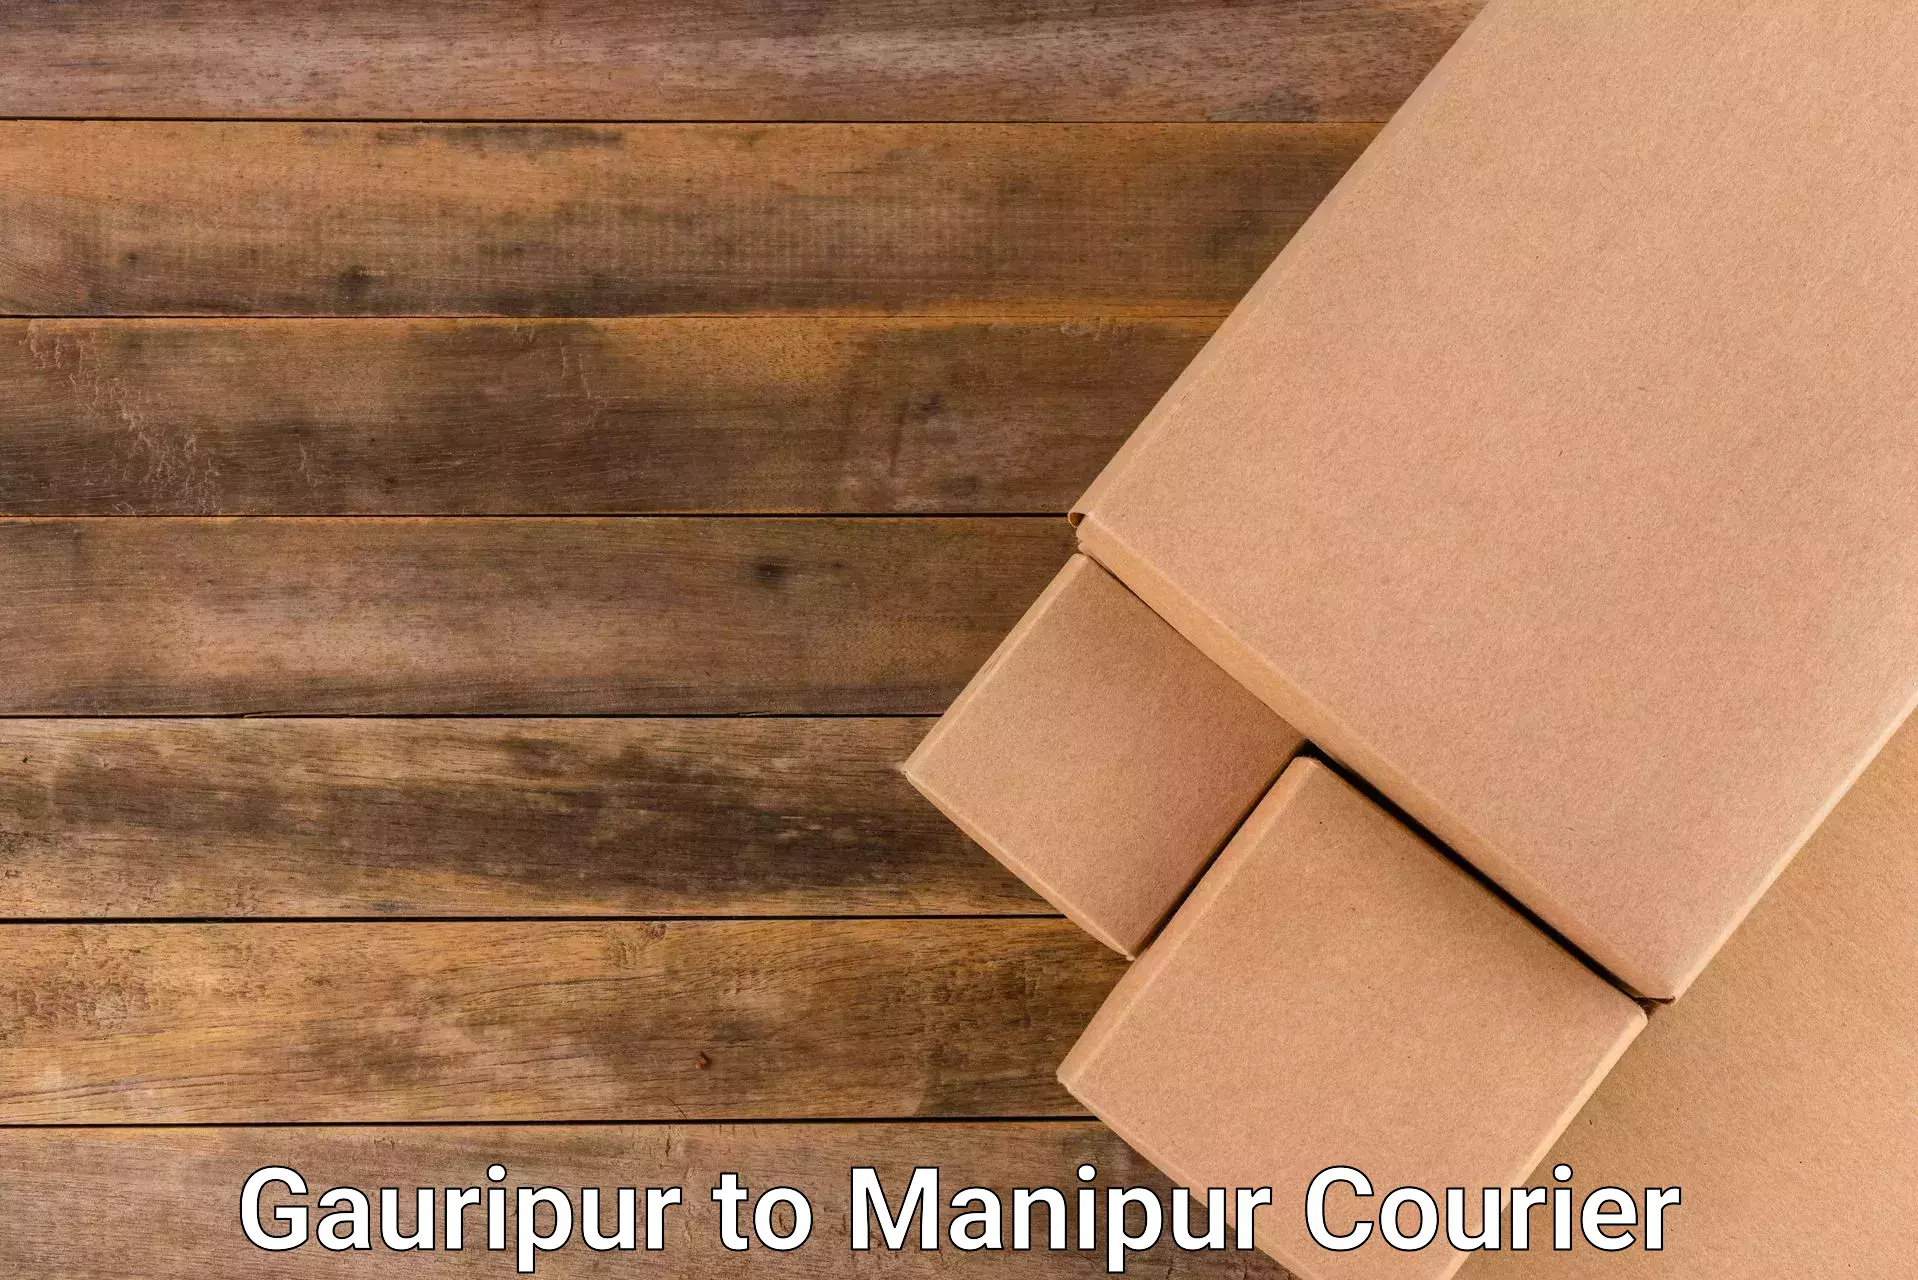 Courier service booking Gauripur to Imphal